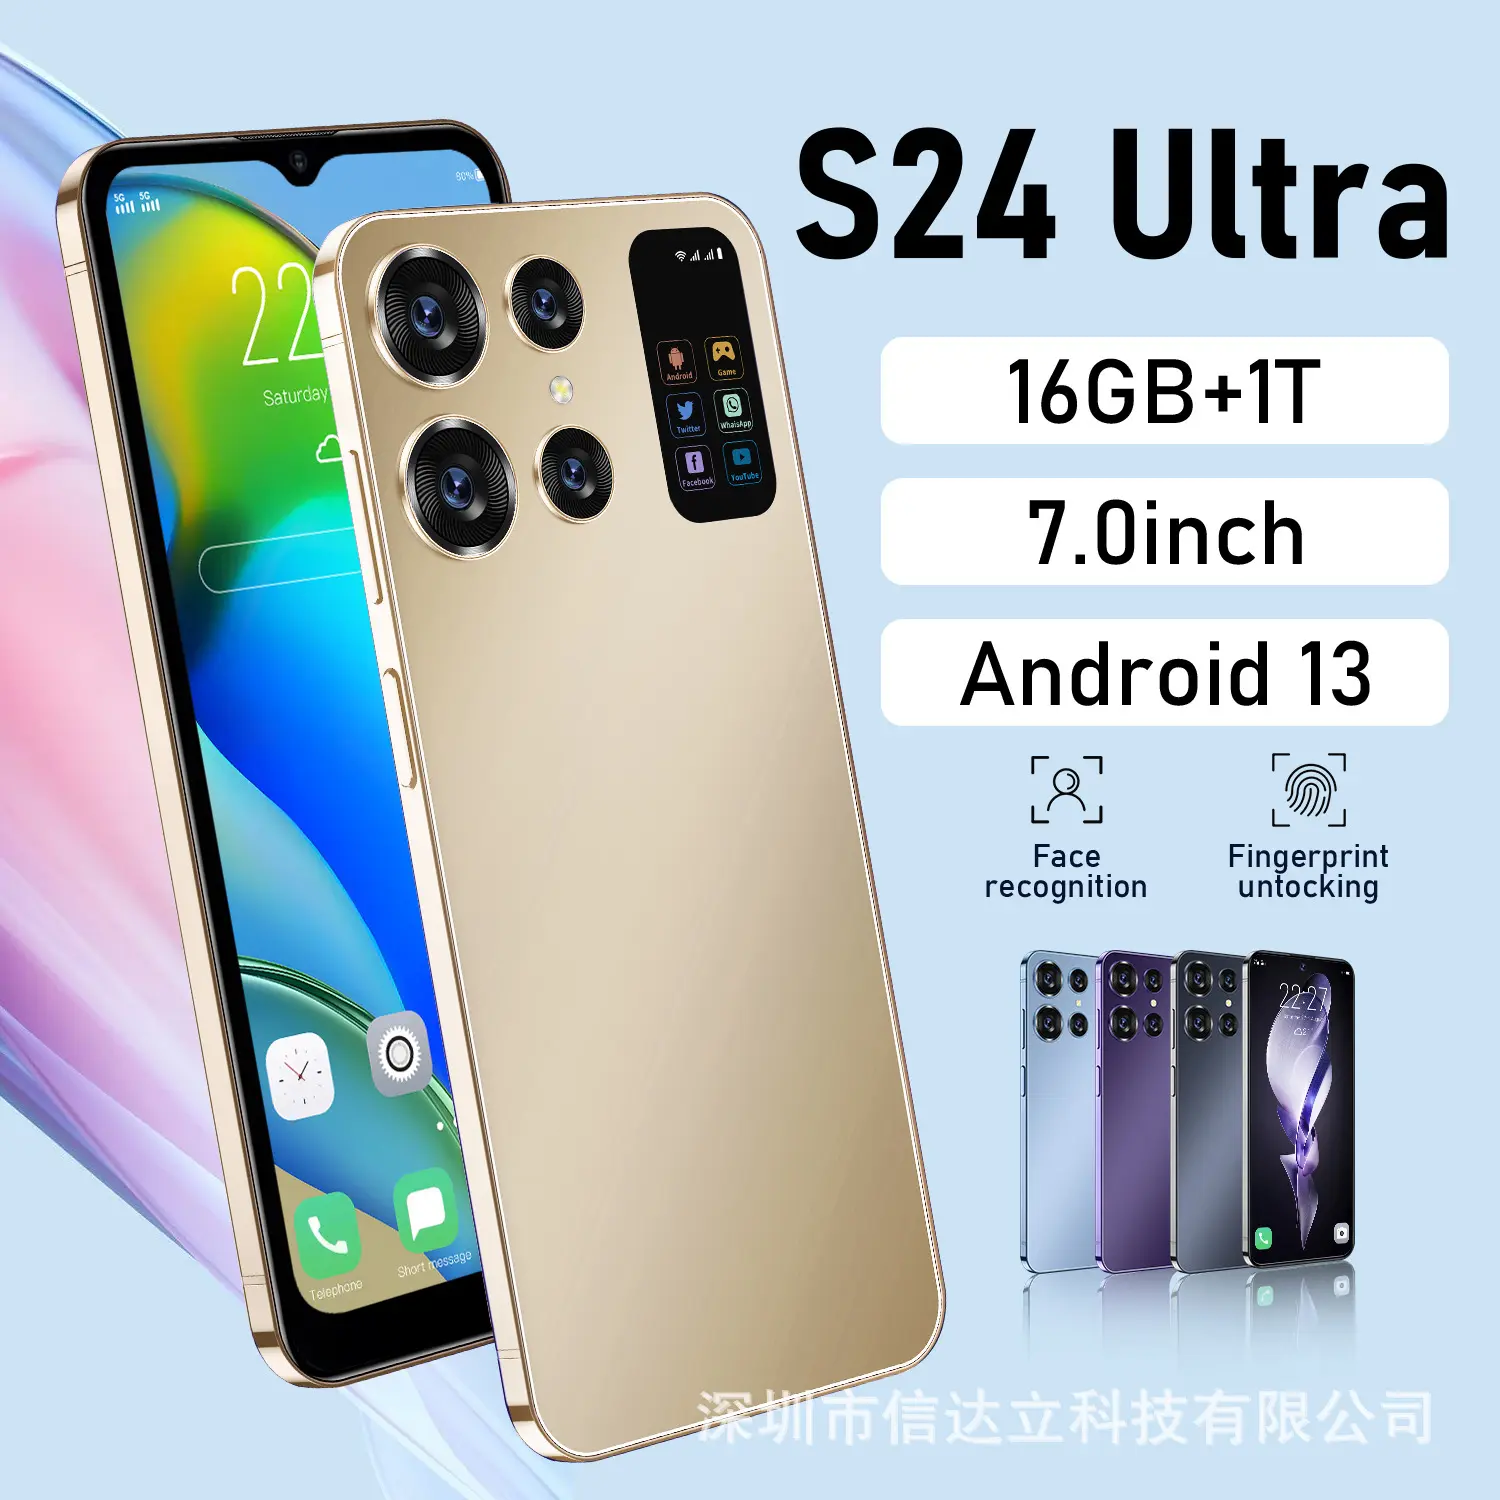 Original phone S24 over 6.8 inches 16GB+1TB facial ID unlocked phone 5G smartphone